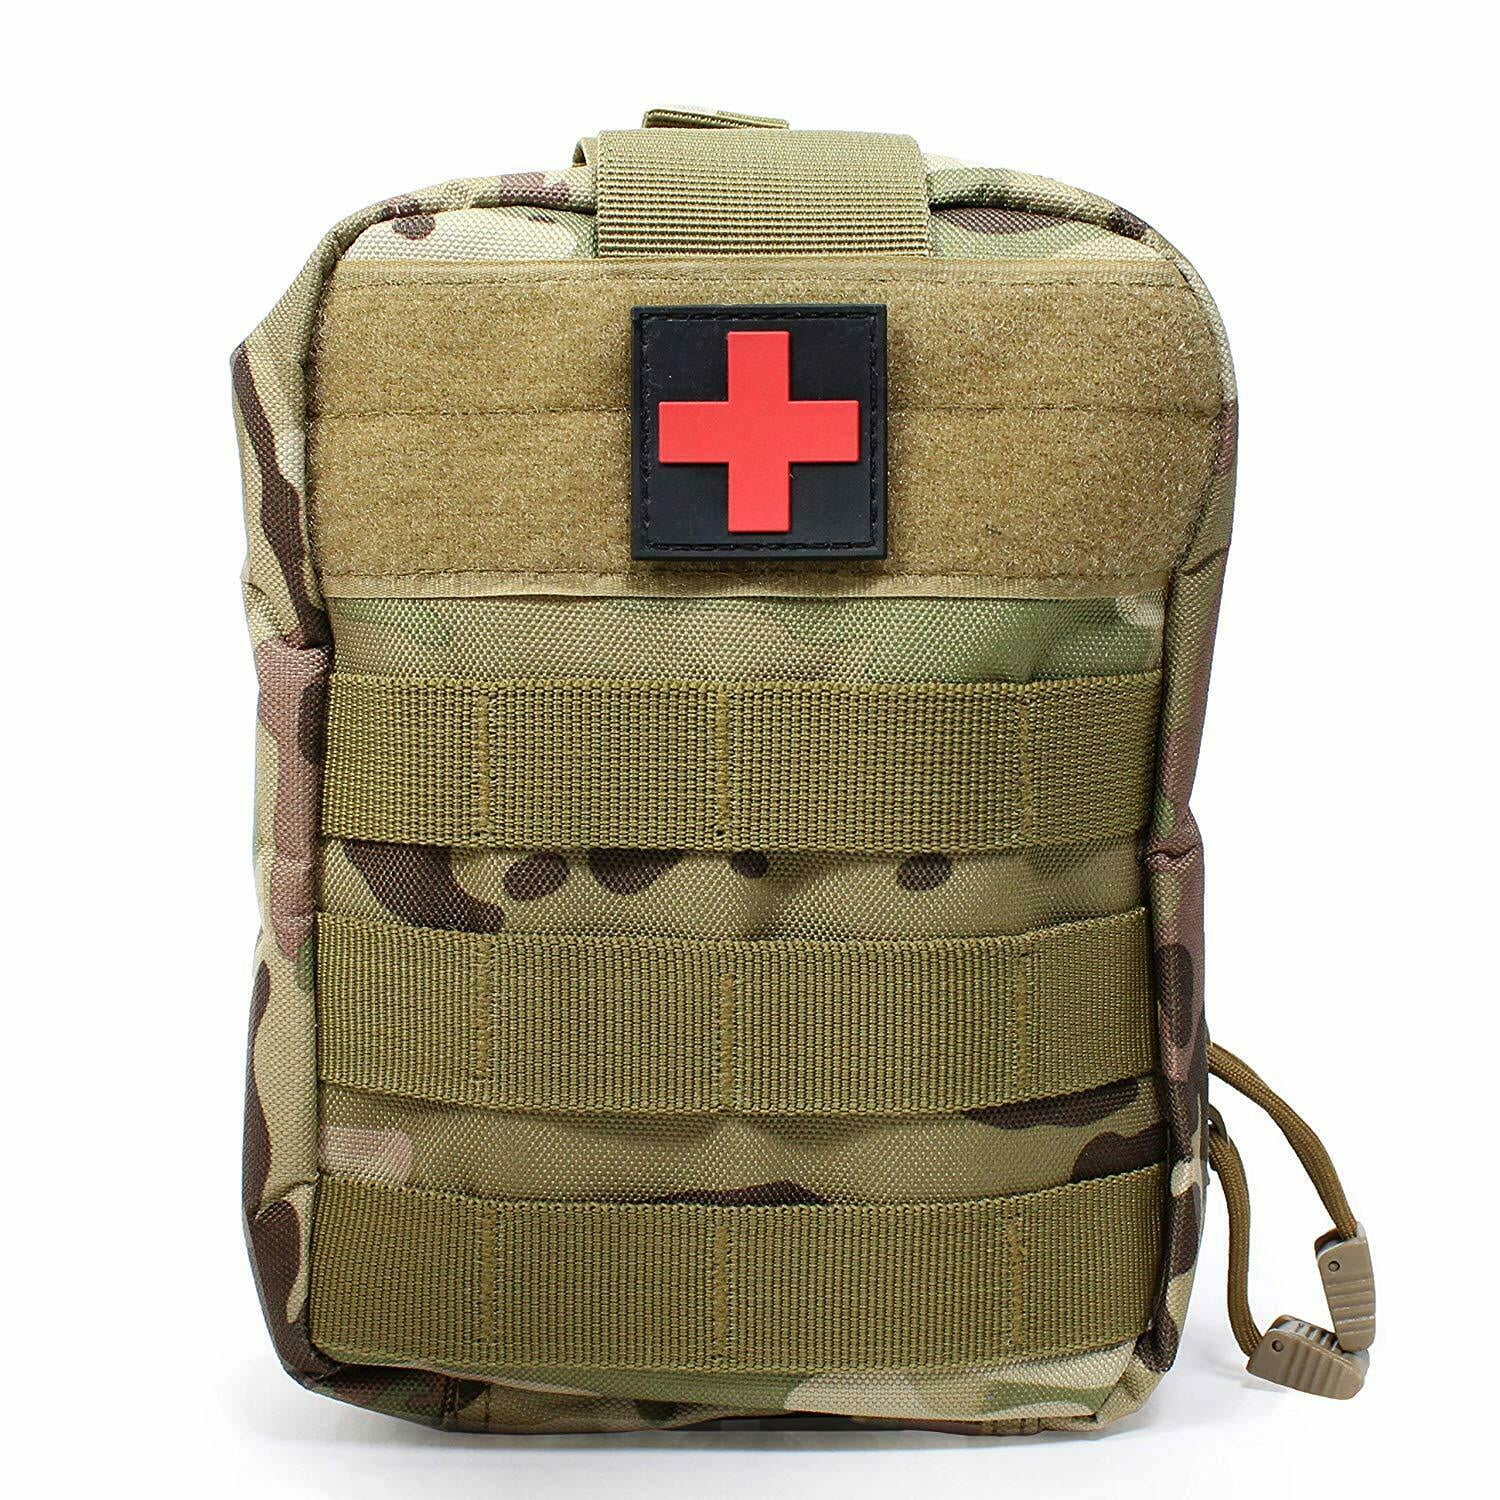 Molle Military IFAK First Aid Medical Bag Army EMT Accessory Tactical Pouch Tan 